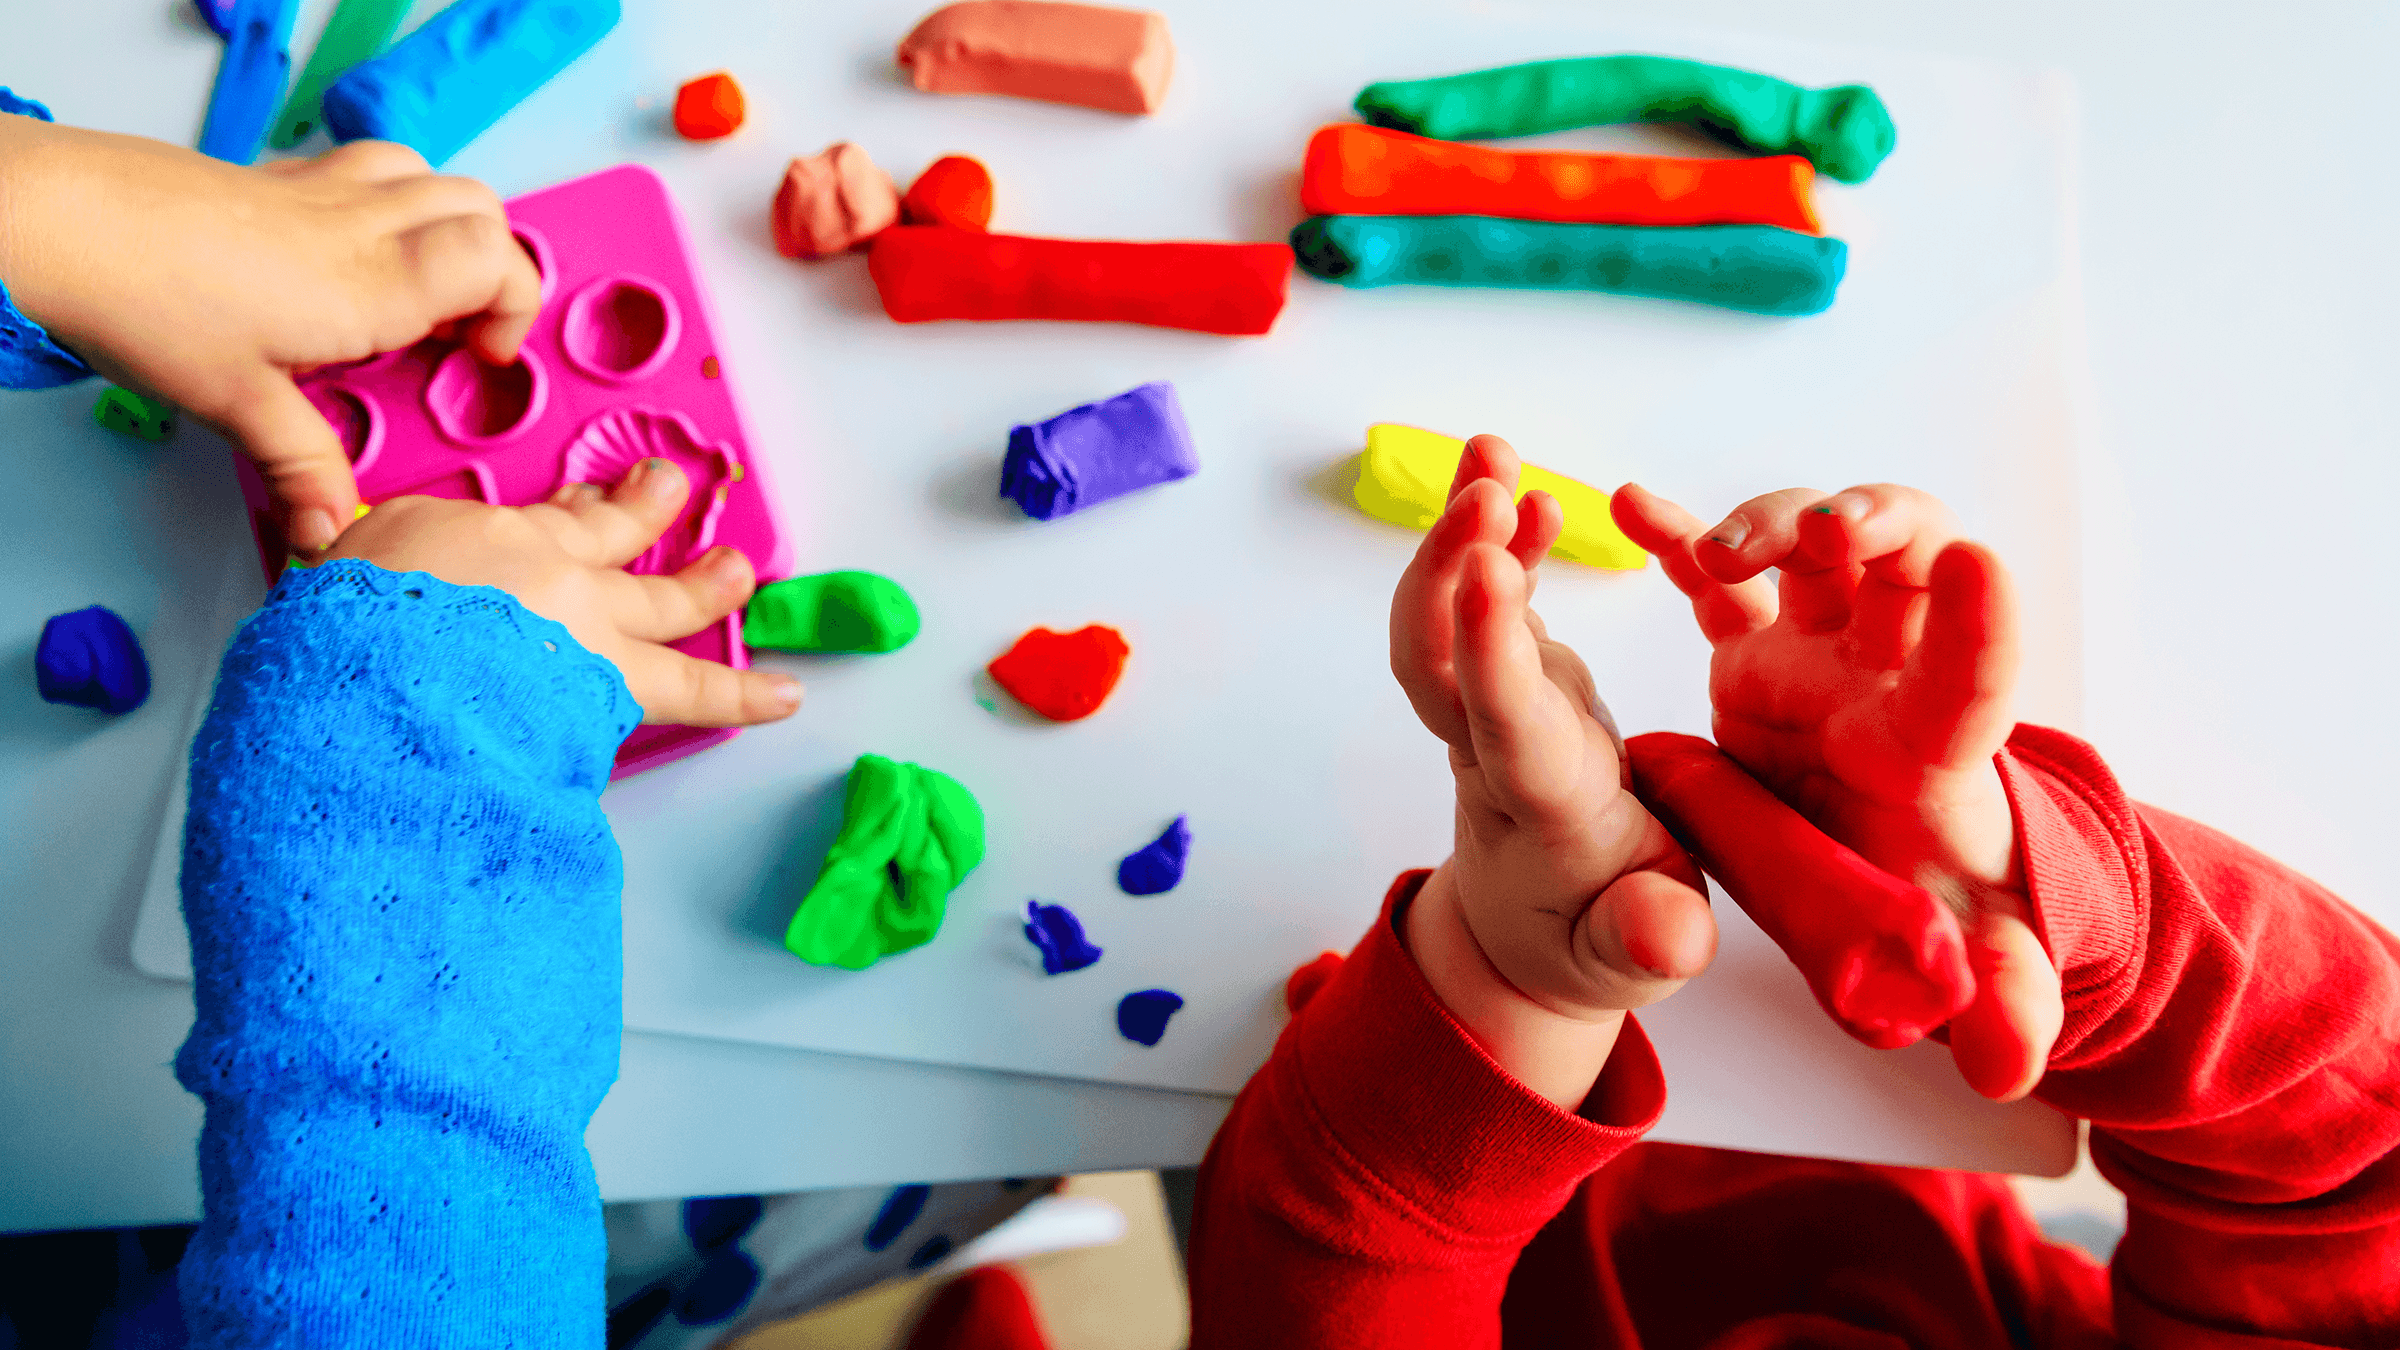 A photo of two children's hands playing with play-dough on a nursery table